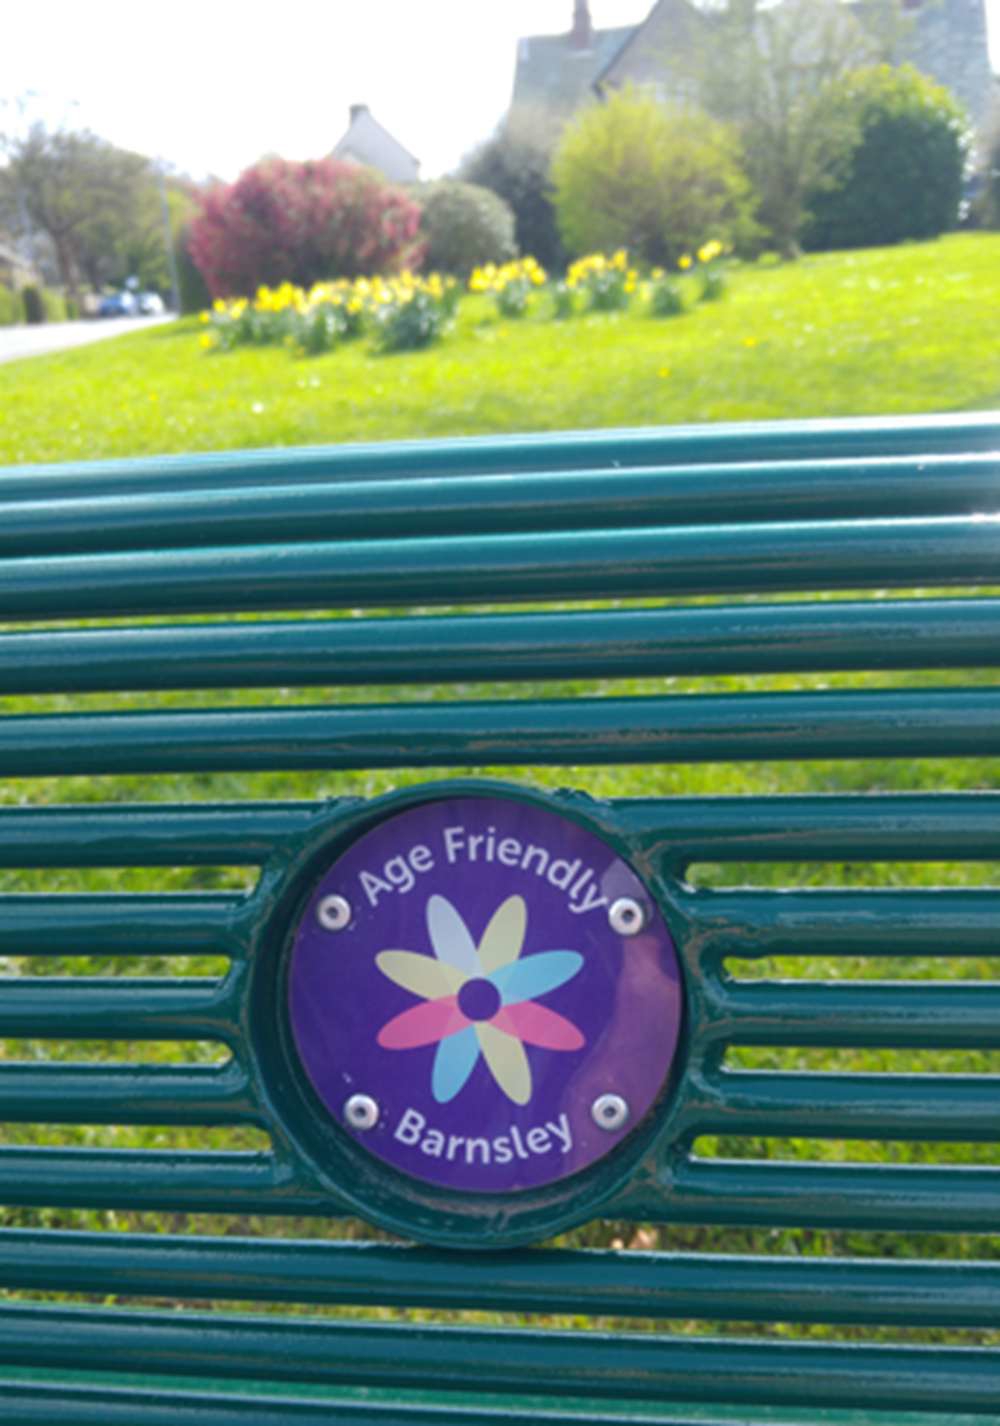 Age Friendly Barnsley bench in Penistone